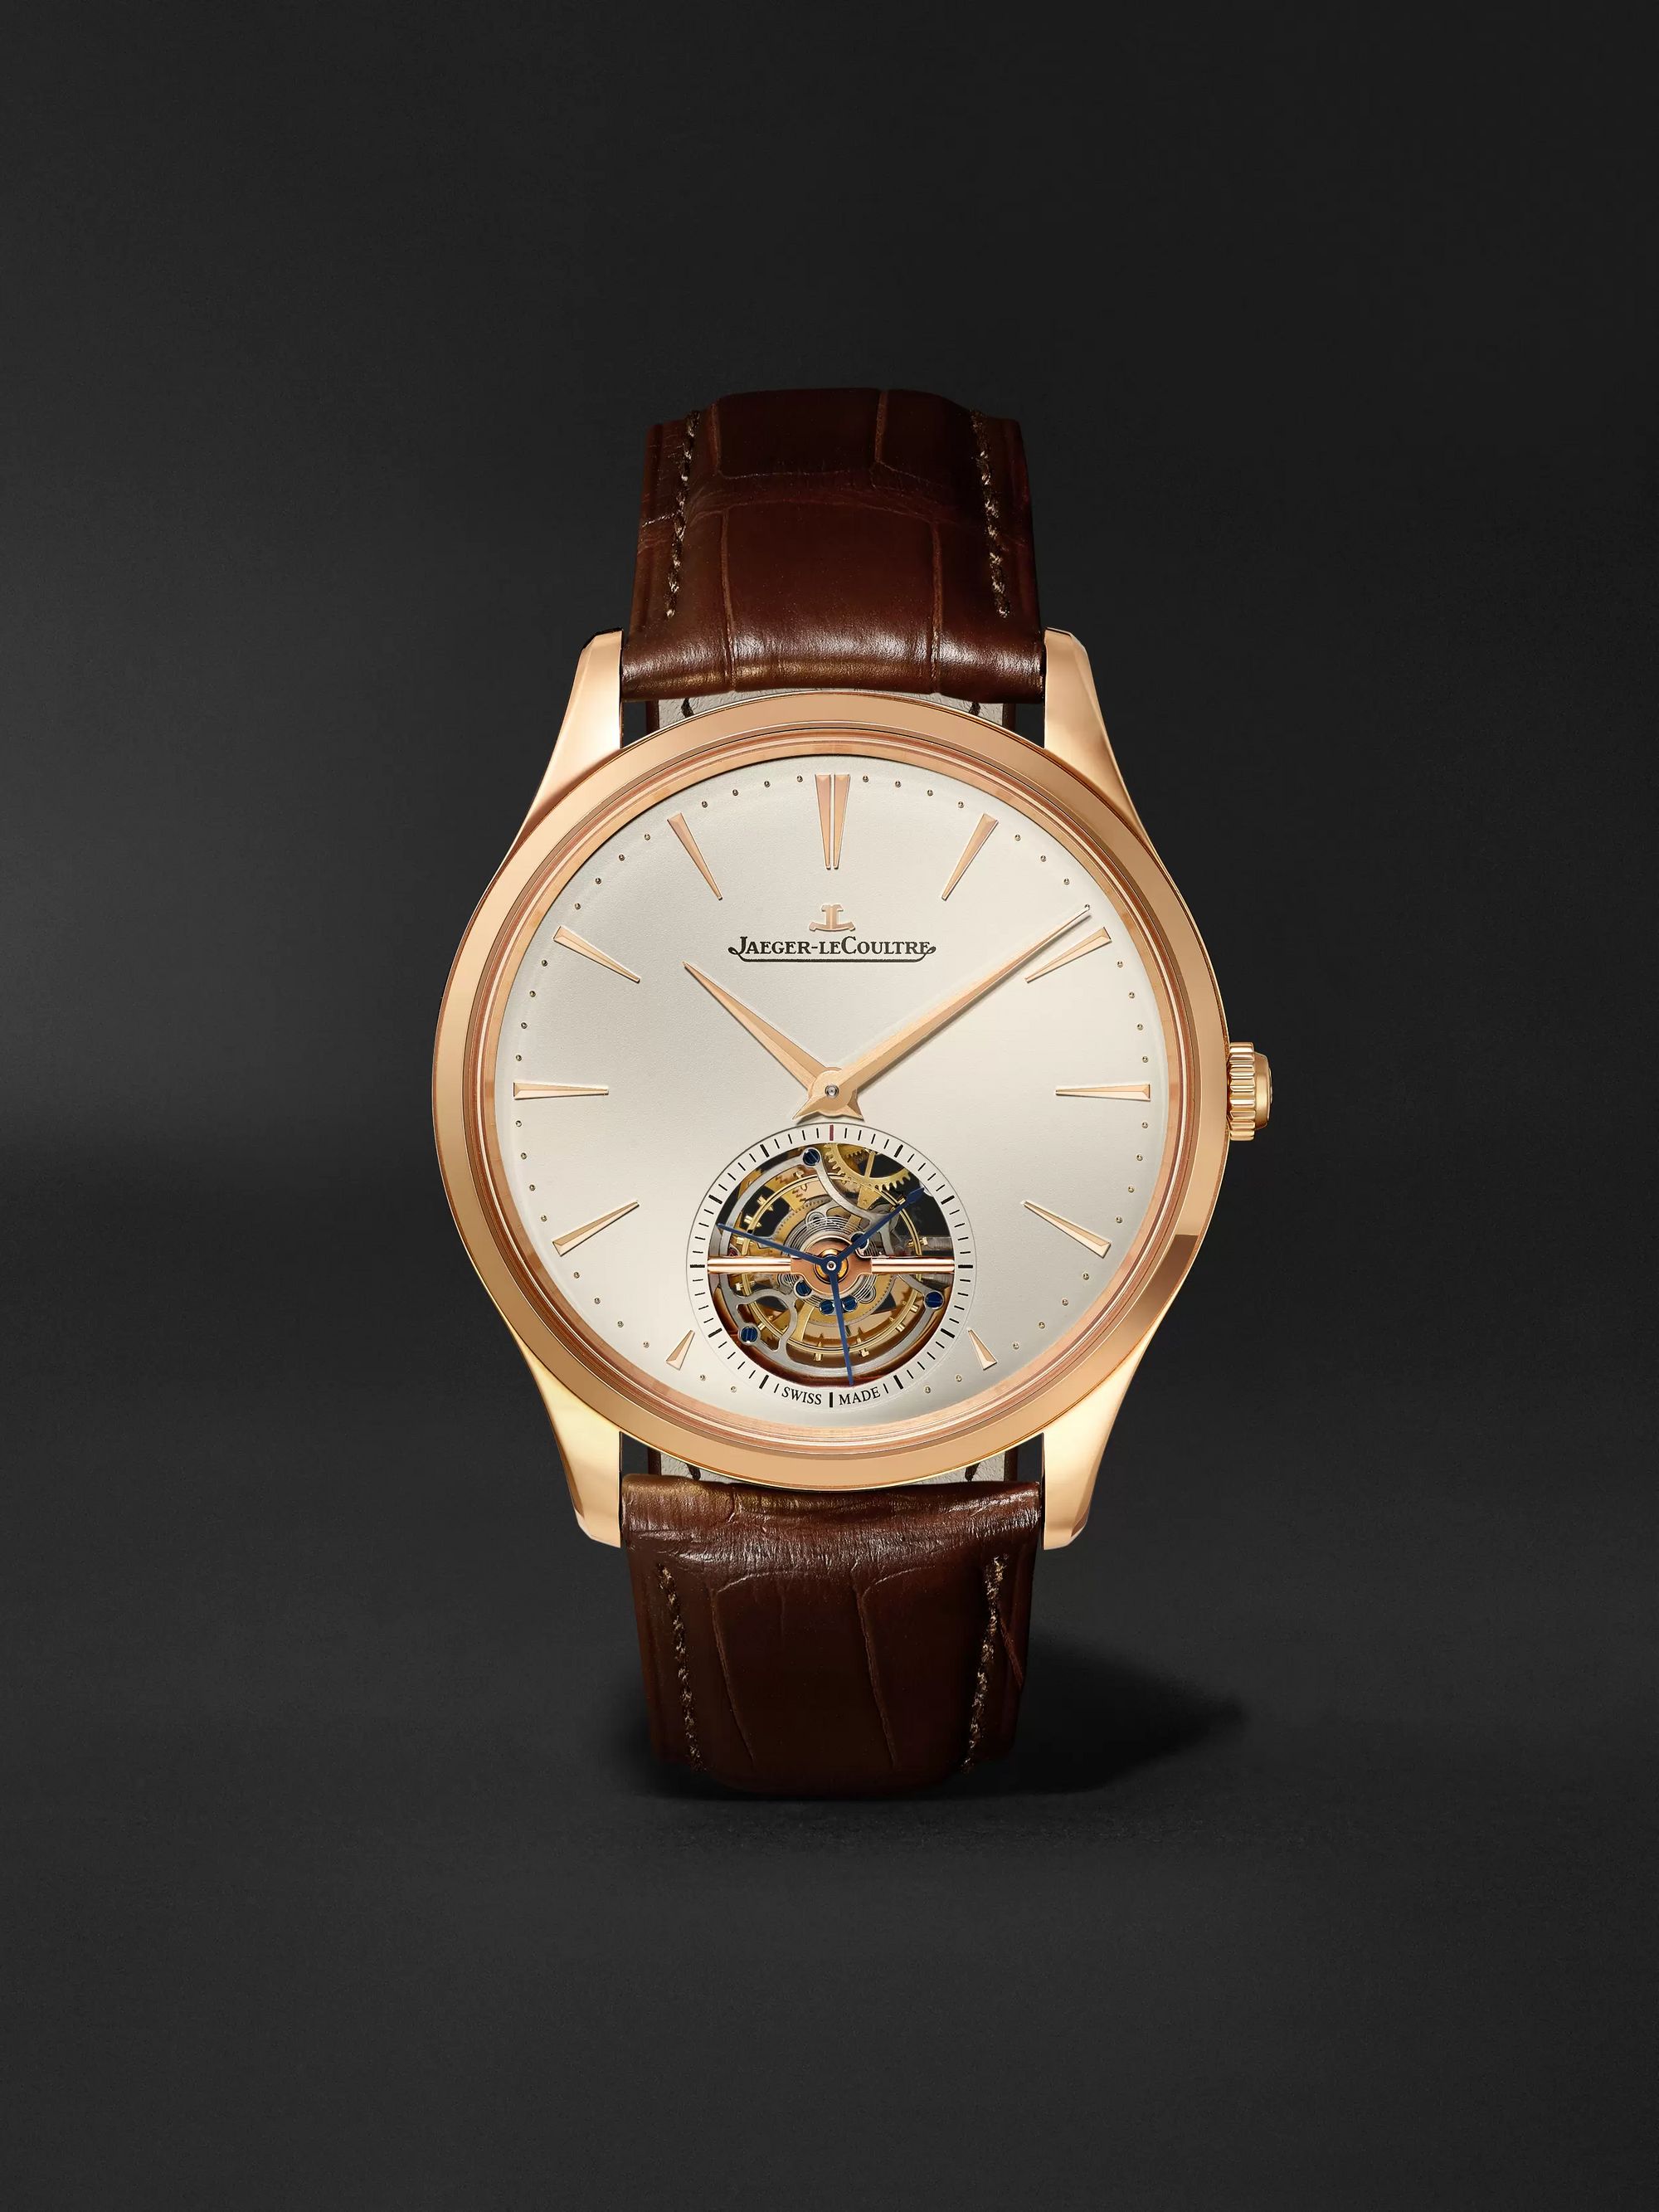 JAEGER-LECOULTRE Master Ultra Thin Tourbillon Automatic 40mm 18-Karat Pink Gold and Alligator Watch, Ref. No. 1682410